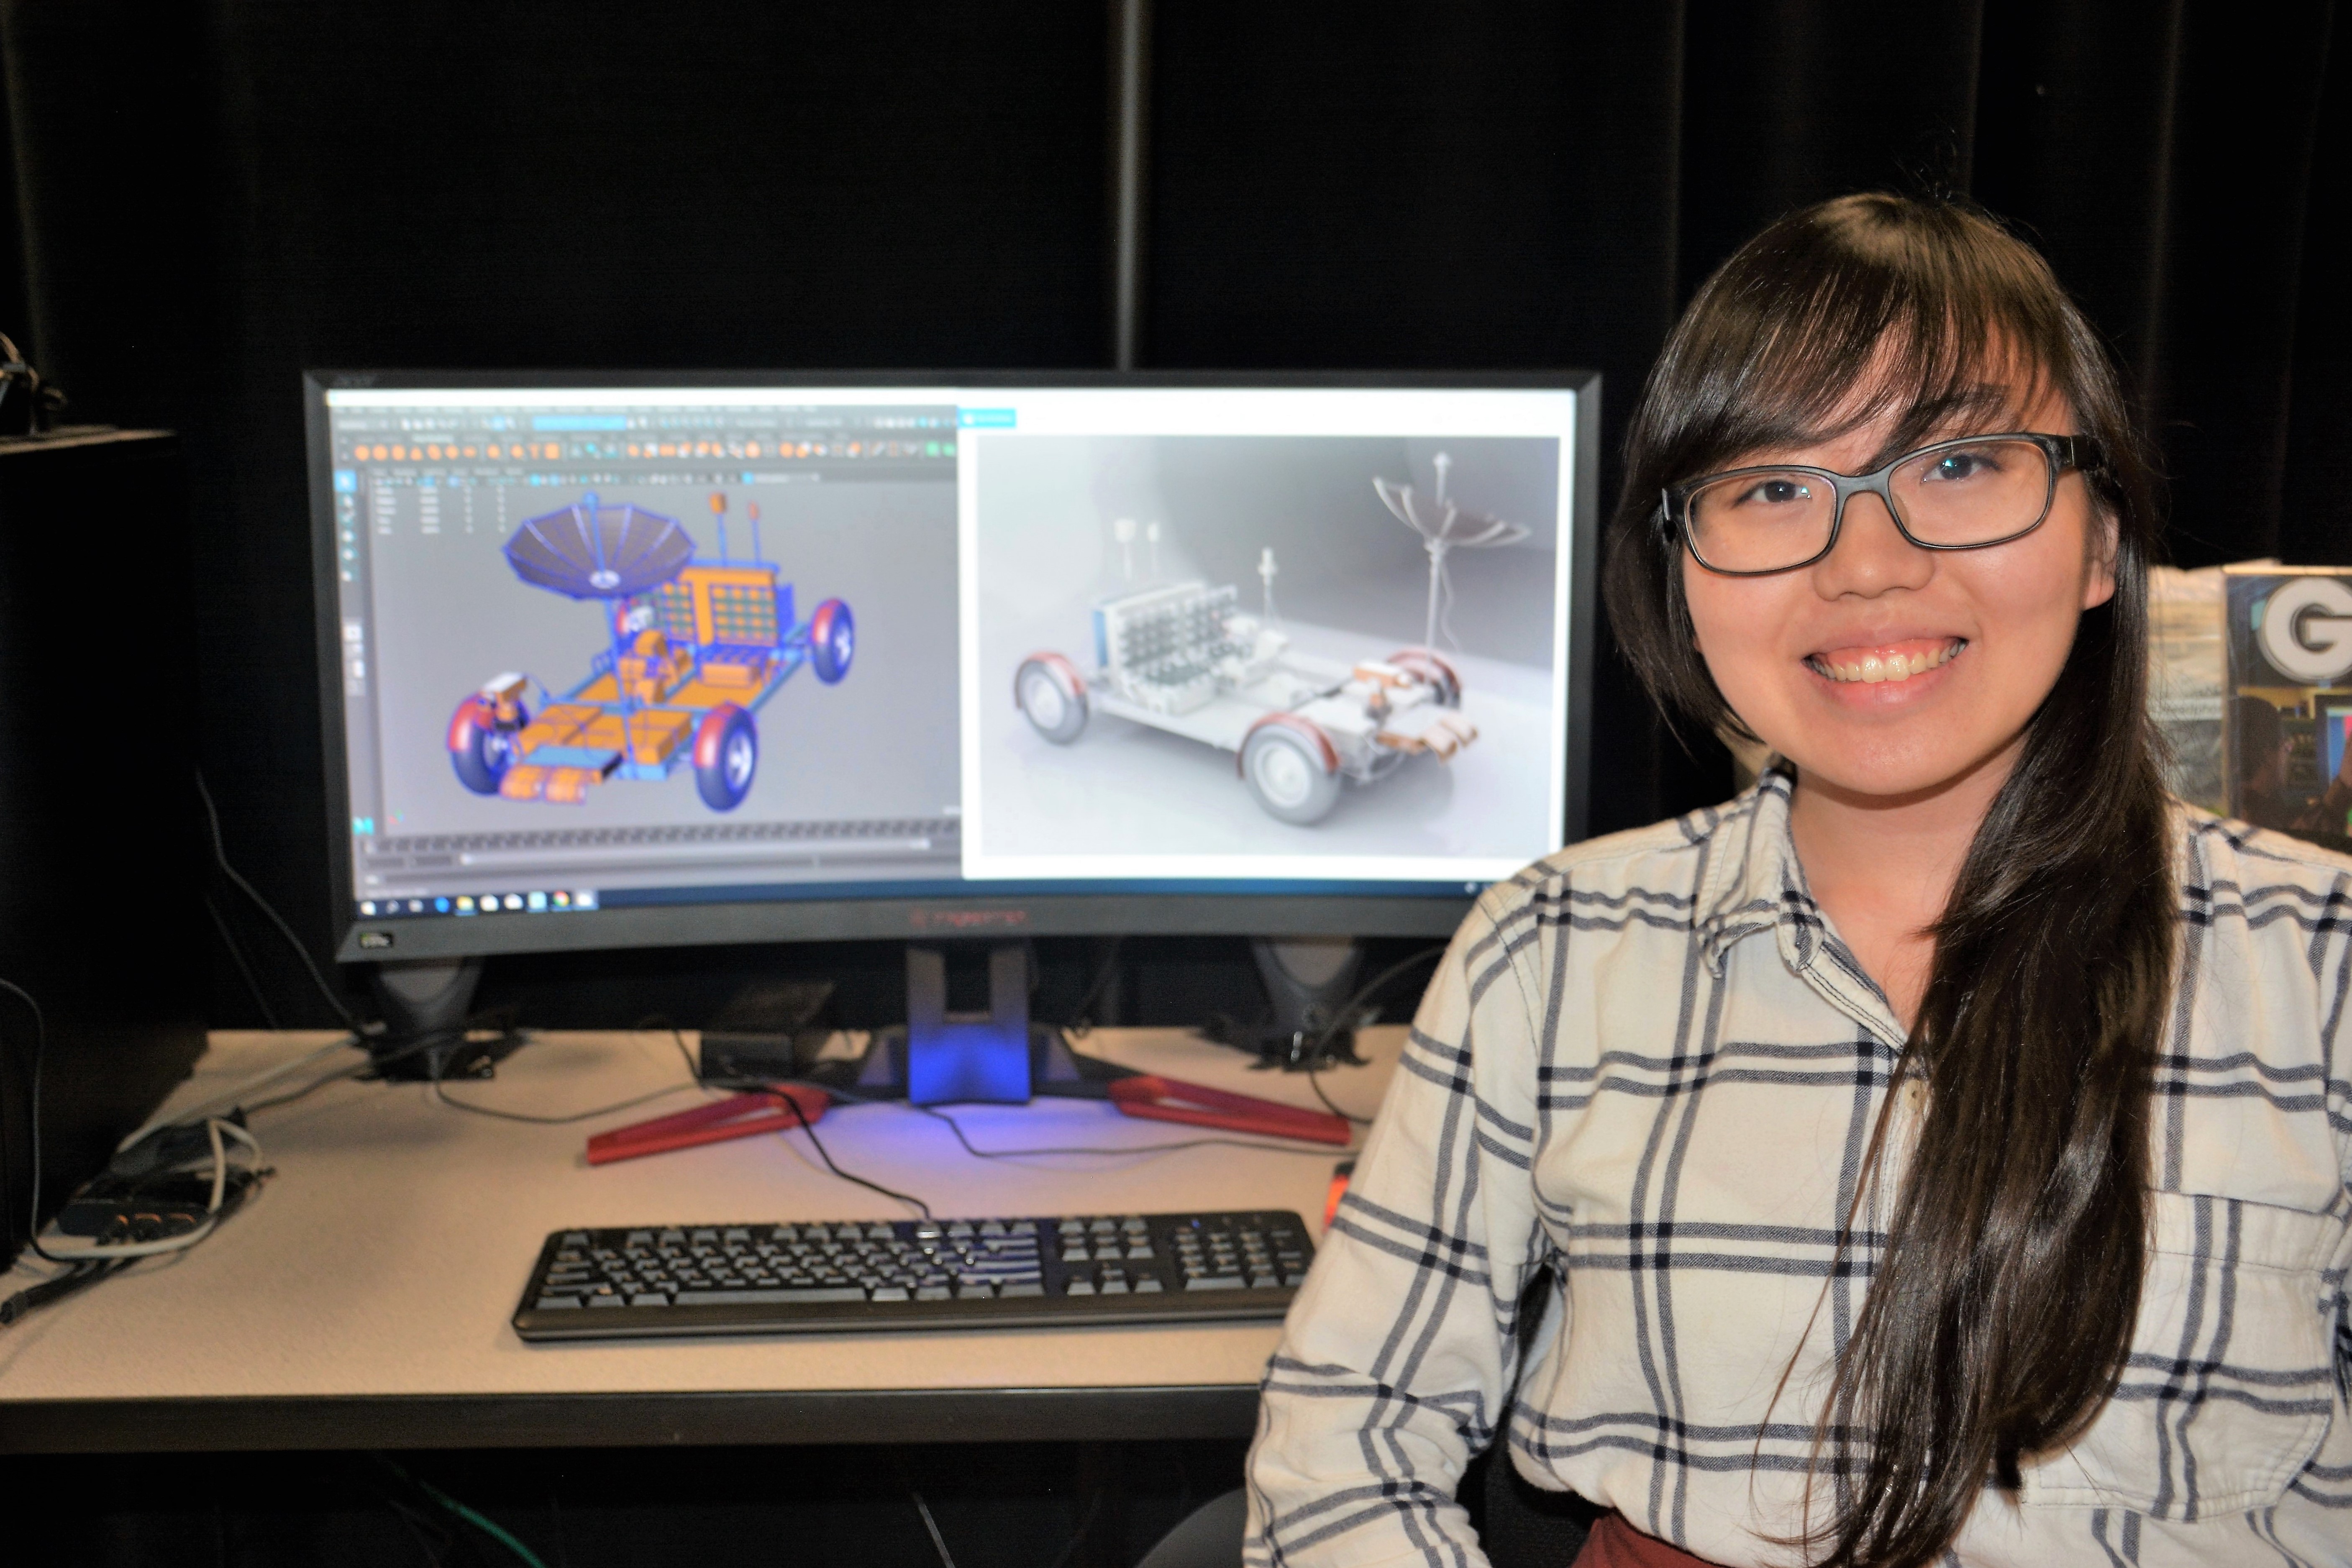 An intern sits in front of a computer displaying a 3D model of a vehicle.